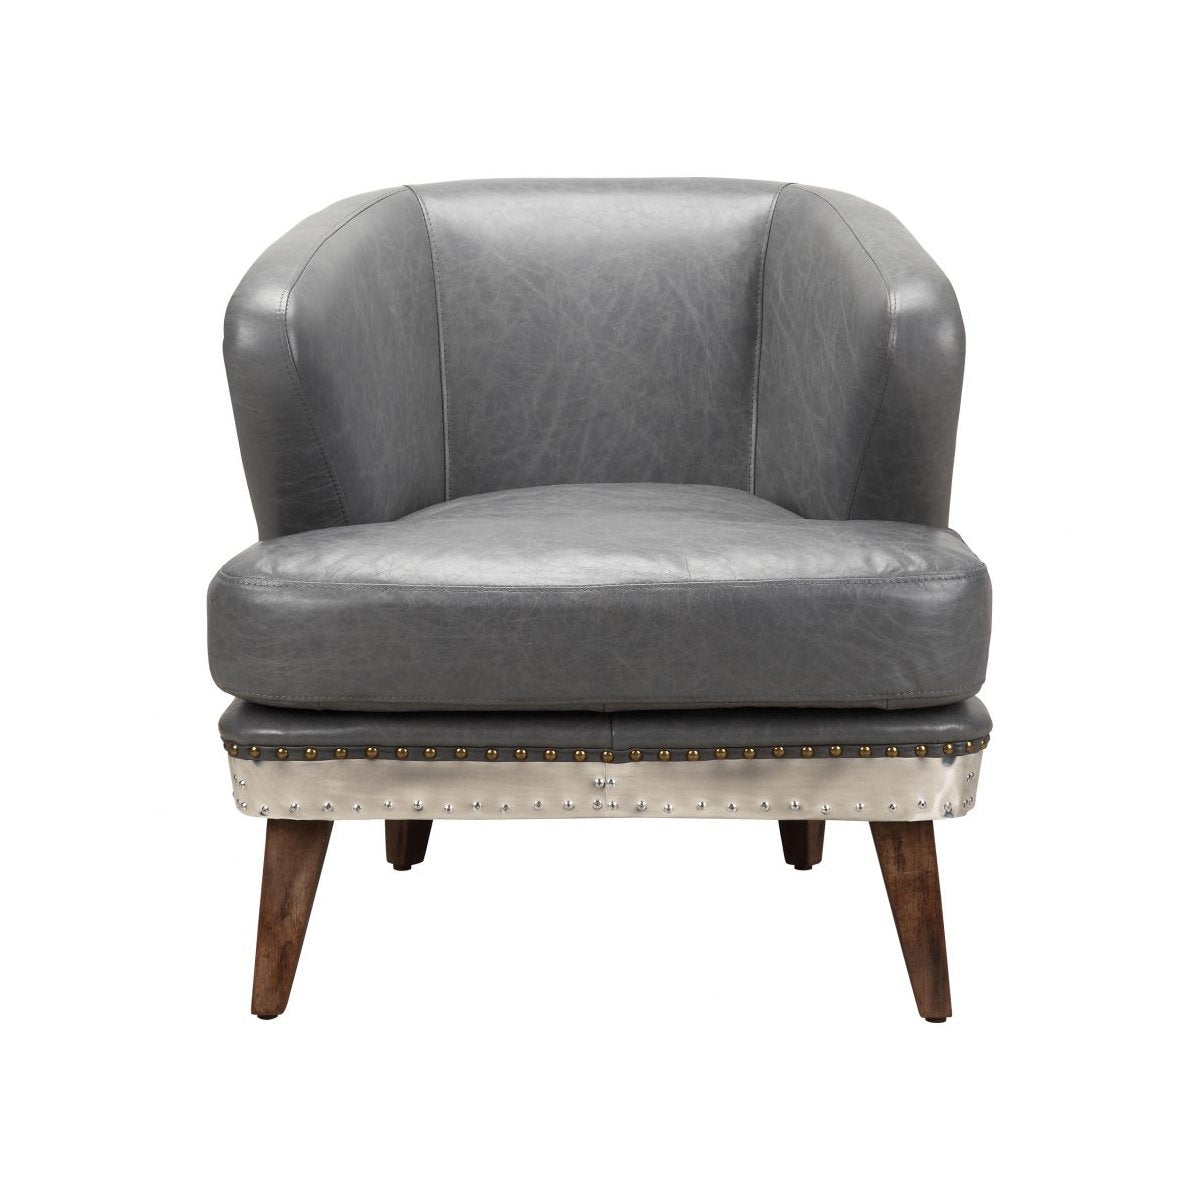 Load image into Gallery viewer, Cambridge Club Chair Antique Grey Occasional Chairs Moe&amp;#39;s     Four Hands, Burke Decor, Mid Century Modern Furniture, Old Bones Furniture Company, Old Bones Co, Modern Mid Century, Designer Furniture, https://www.oldbonesco.com/
